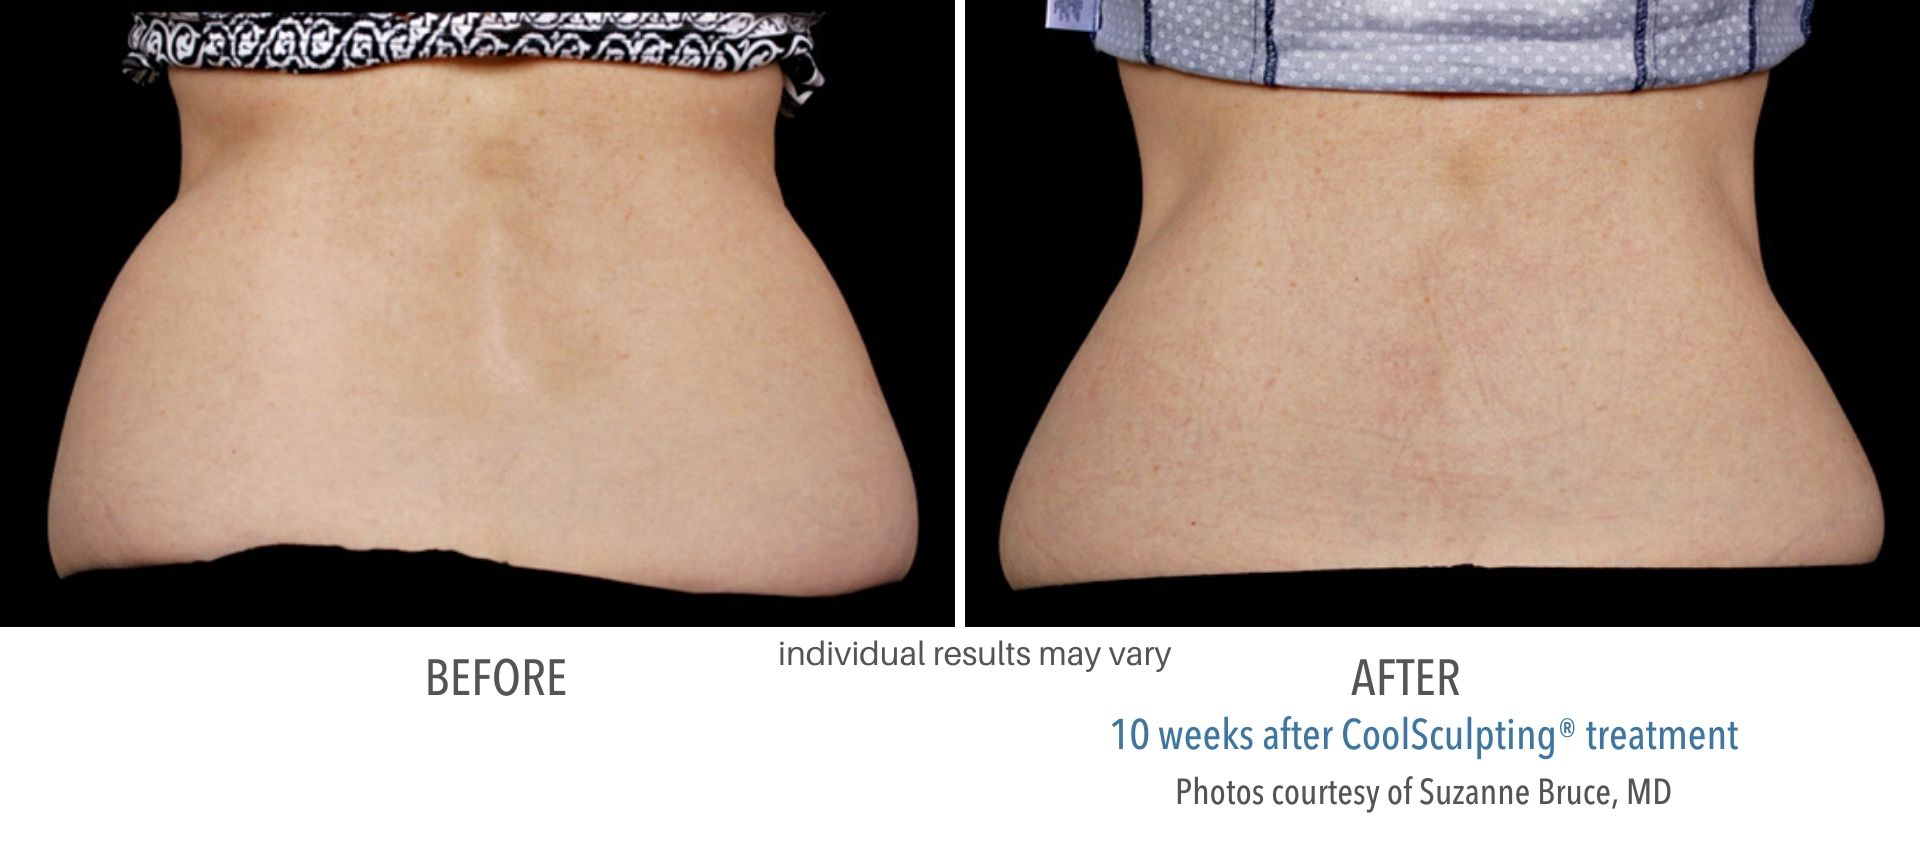 coolsculpting before and after female back fat Laser + Skin Institute in Chatham, NJ